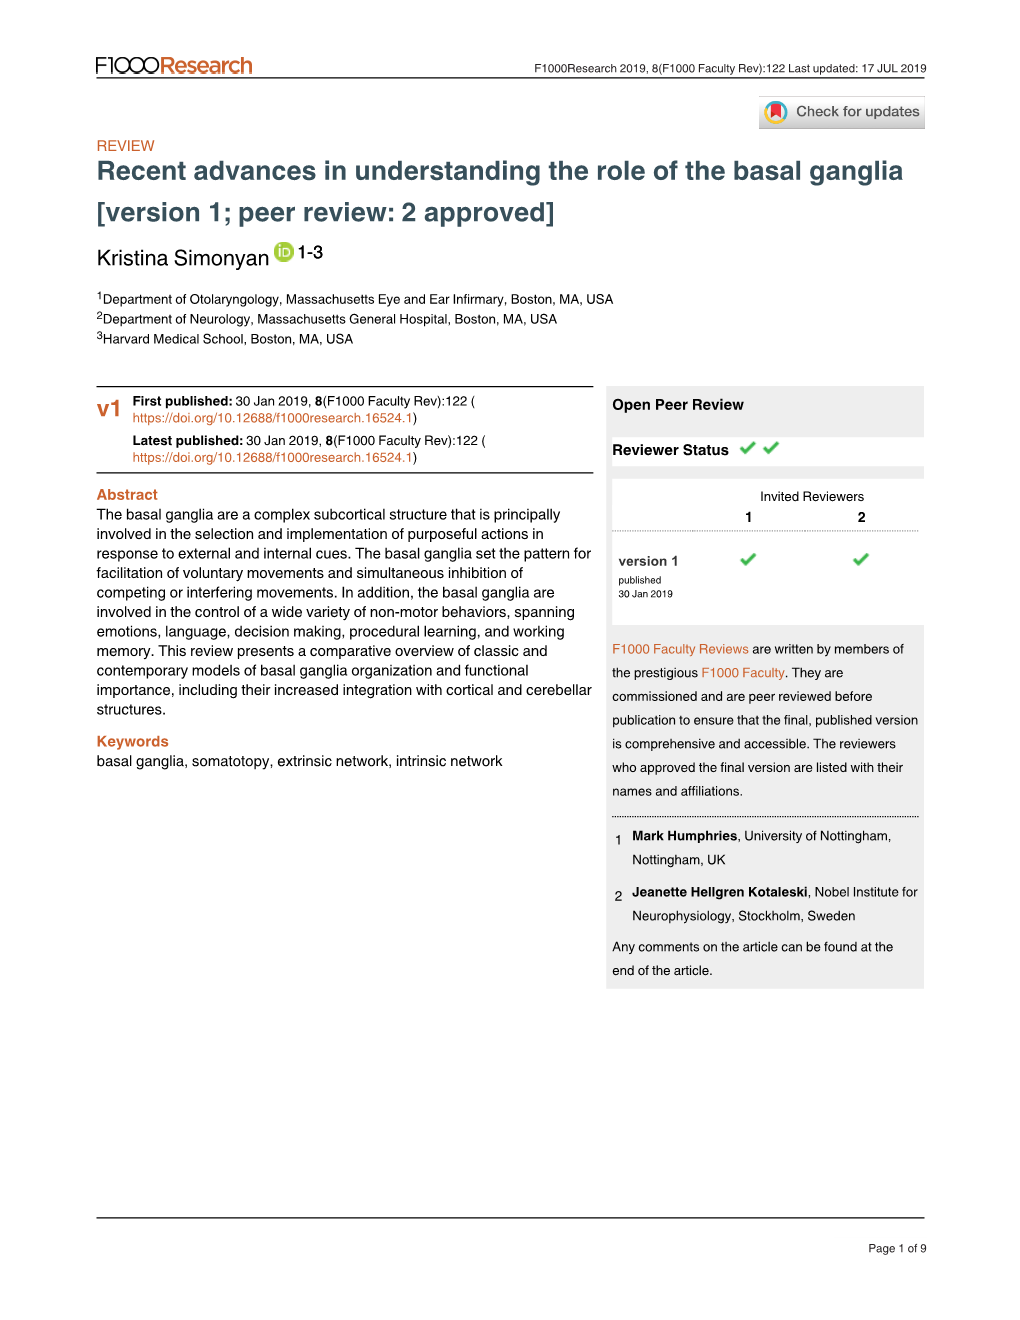 Recent Advances in Understanding the Role of the Basal Ganglia [Version 1; Peer Review: 2 Approved] Kristina Simonyan 1-3